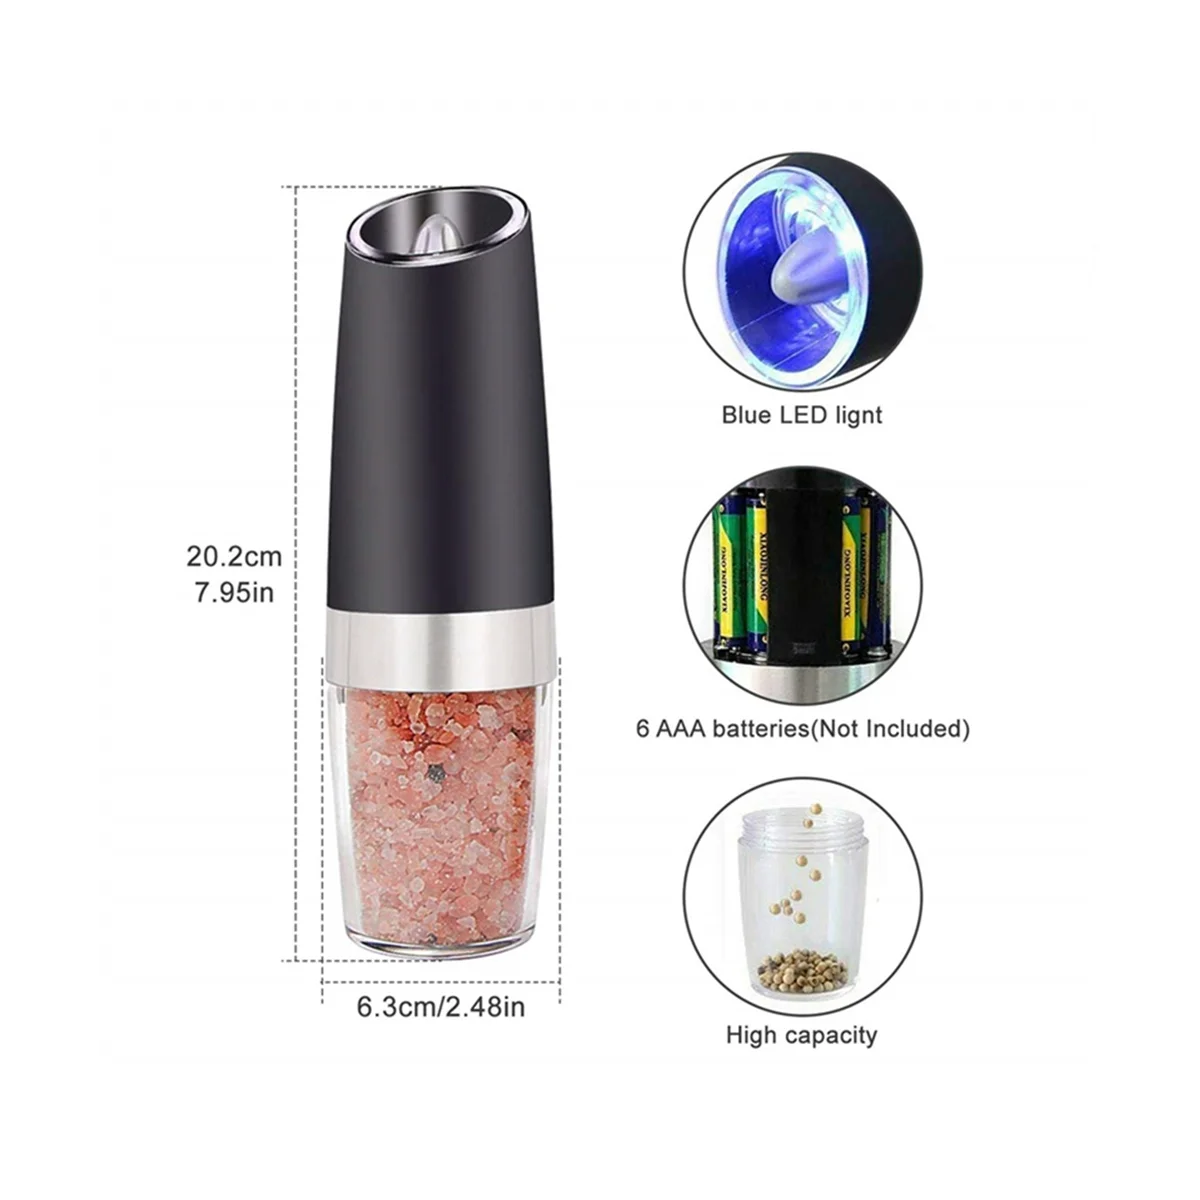 

Electric Pepper Grinder Automatic Gravity Induction Salt and Pepper Spice Grinders with LED Light Kitchen Accessories